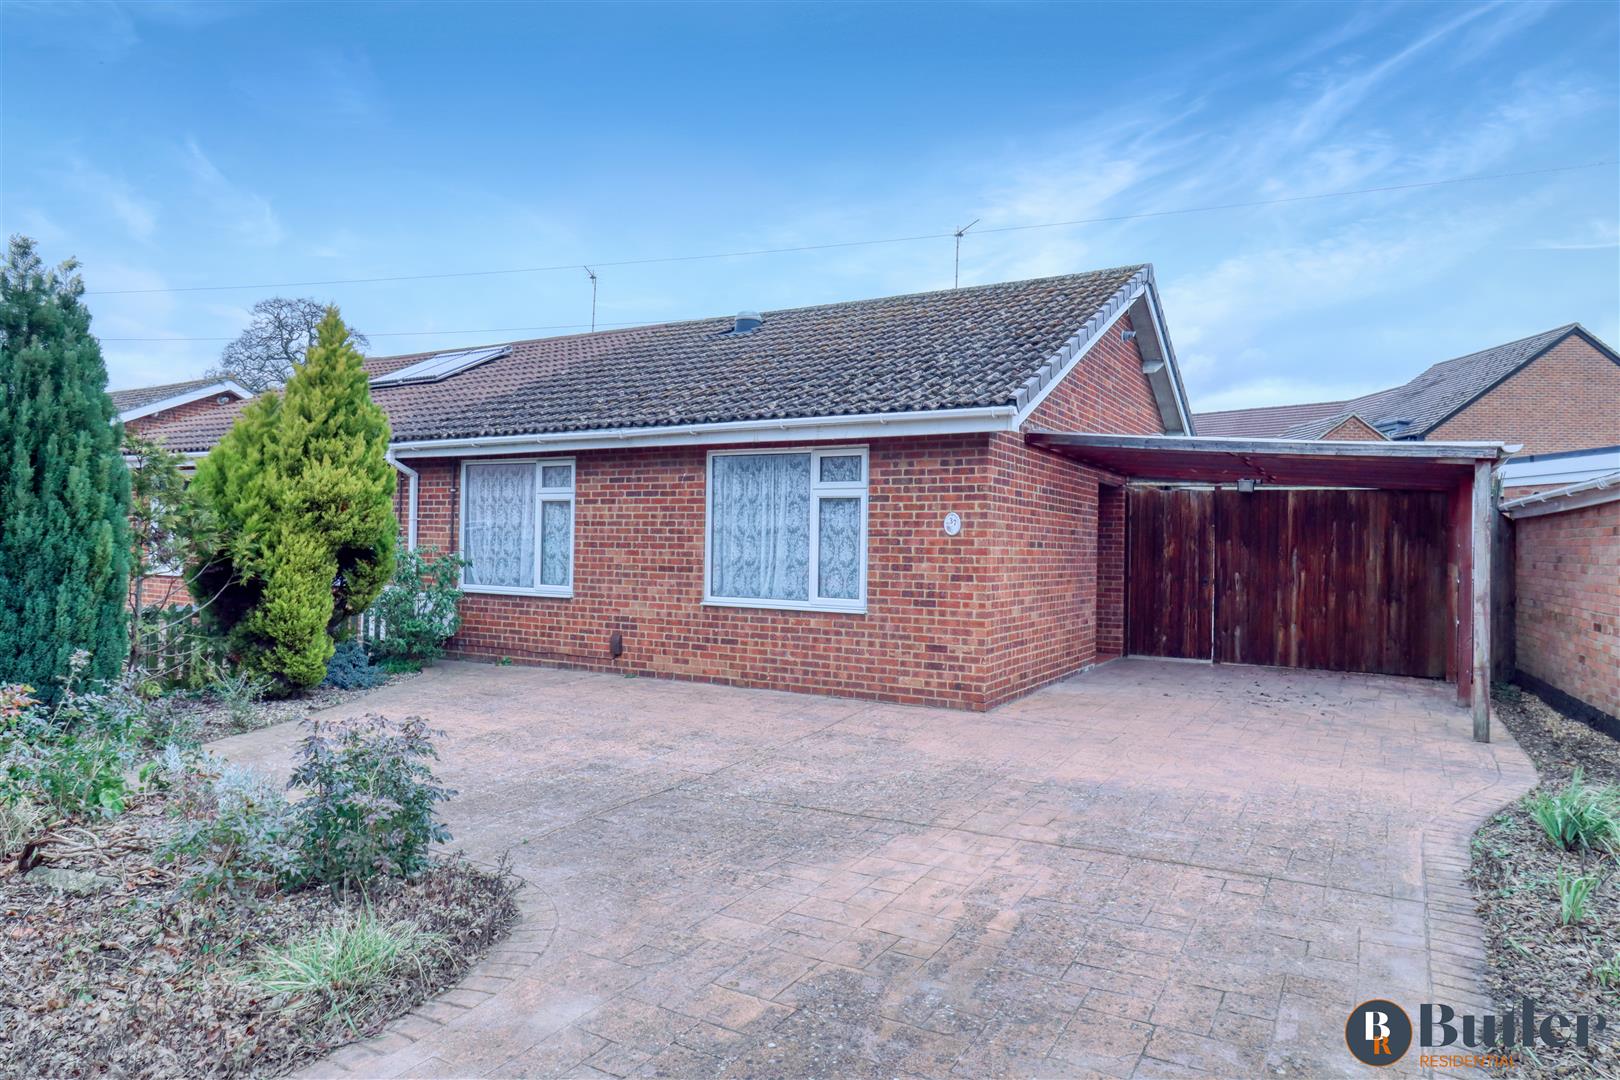 2 bed bungalow for sale in Park Avenue, St. Neots - Property Image 1